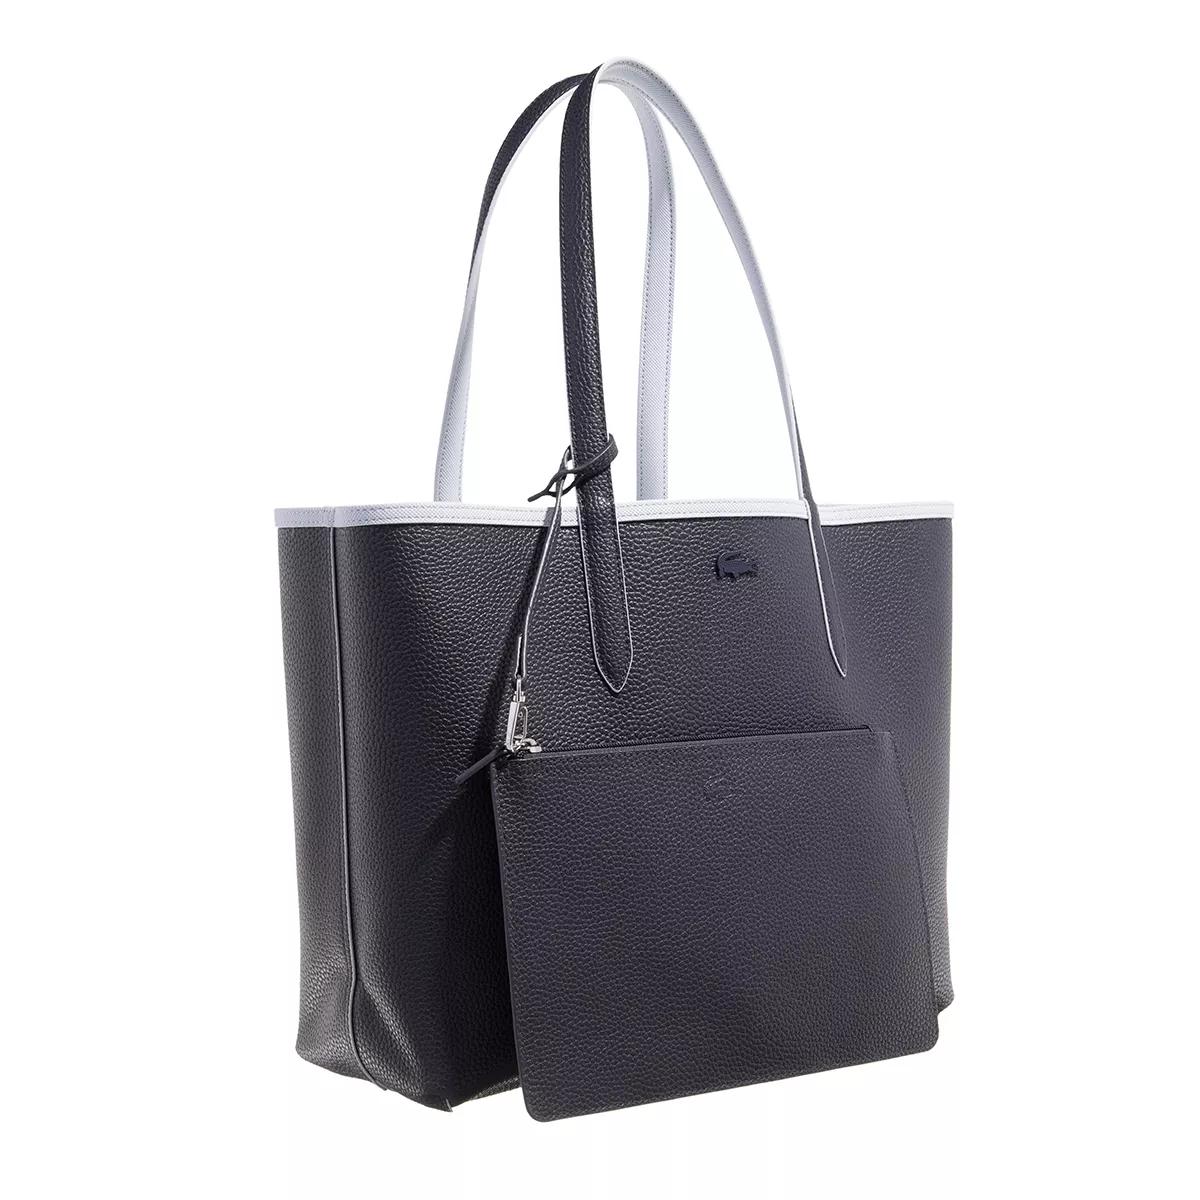 Lacoste Shoppers Anna Shopping Bag in grijs